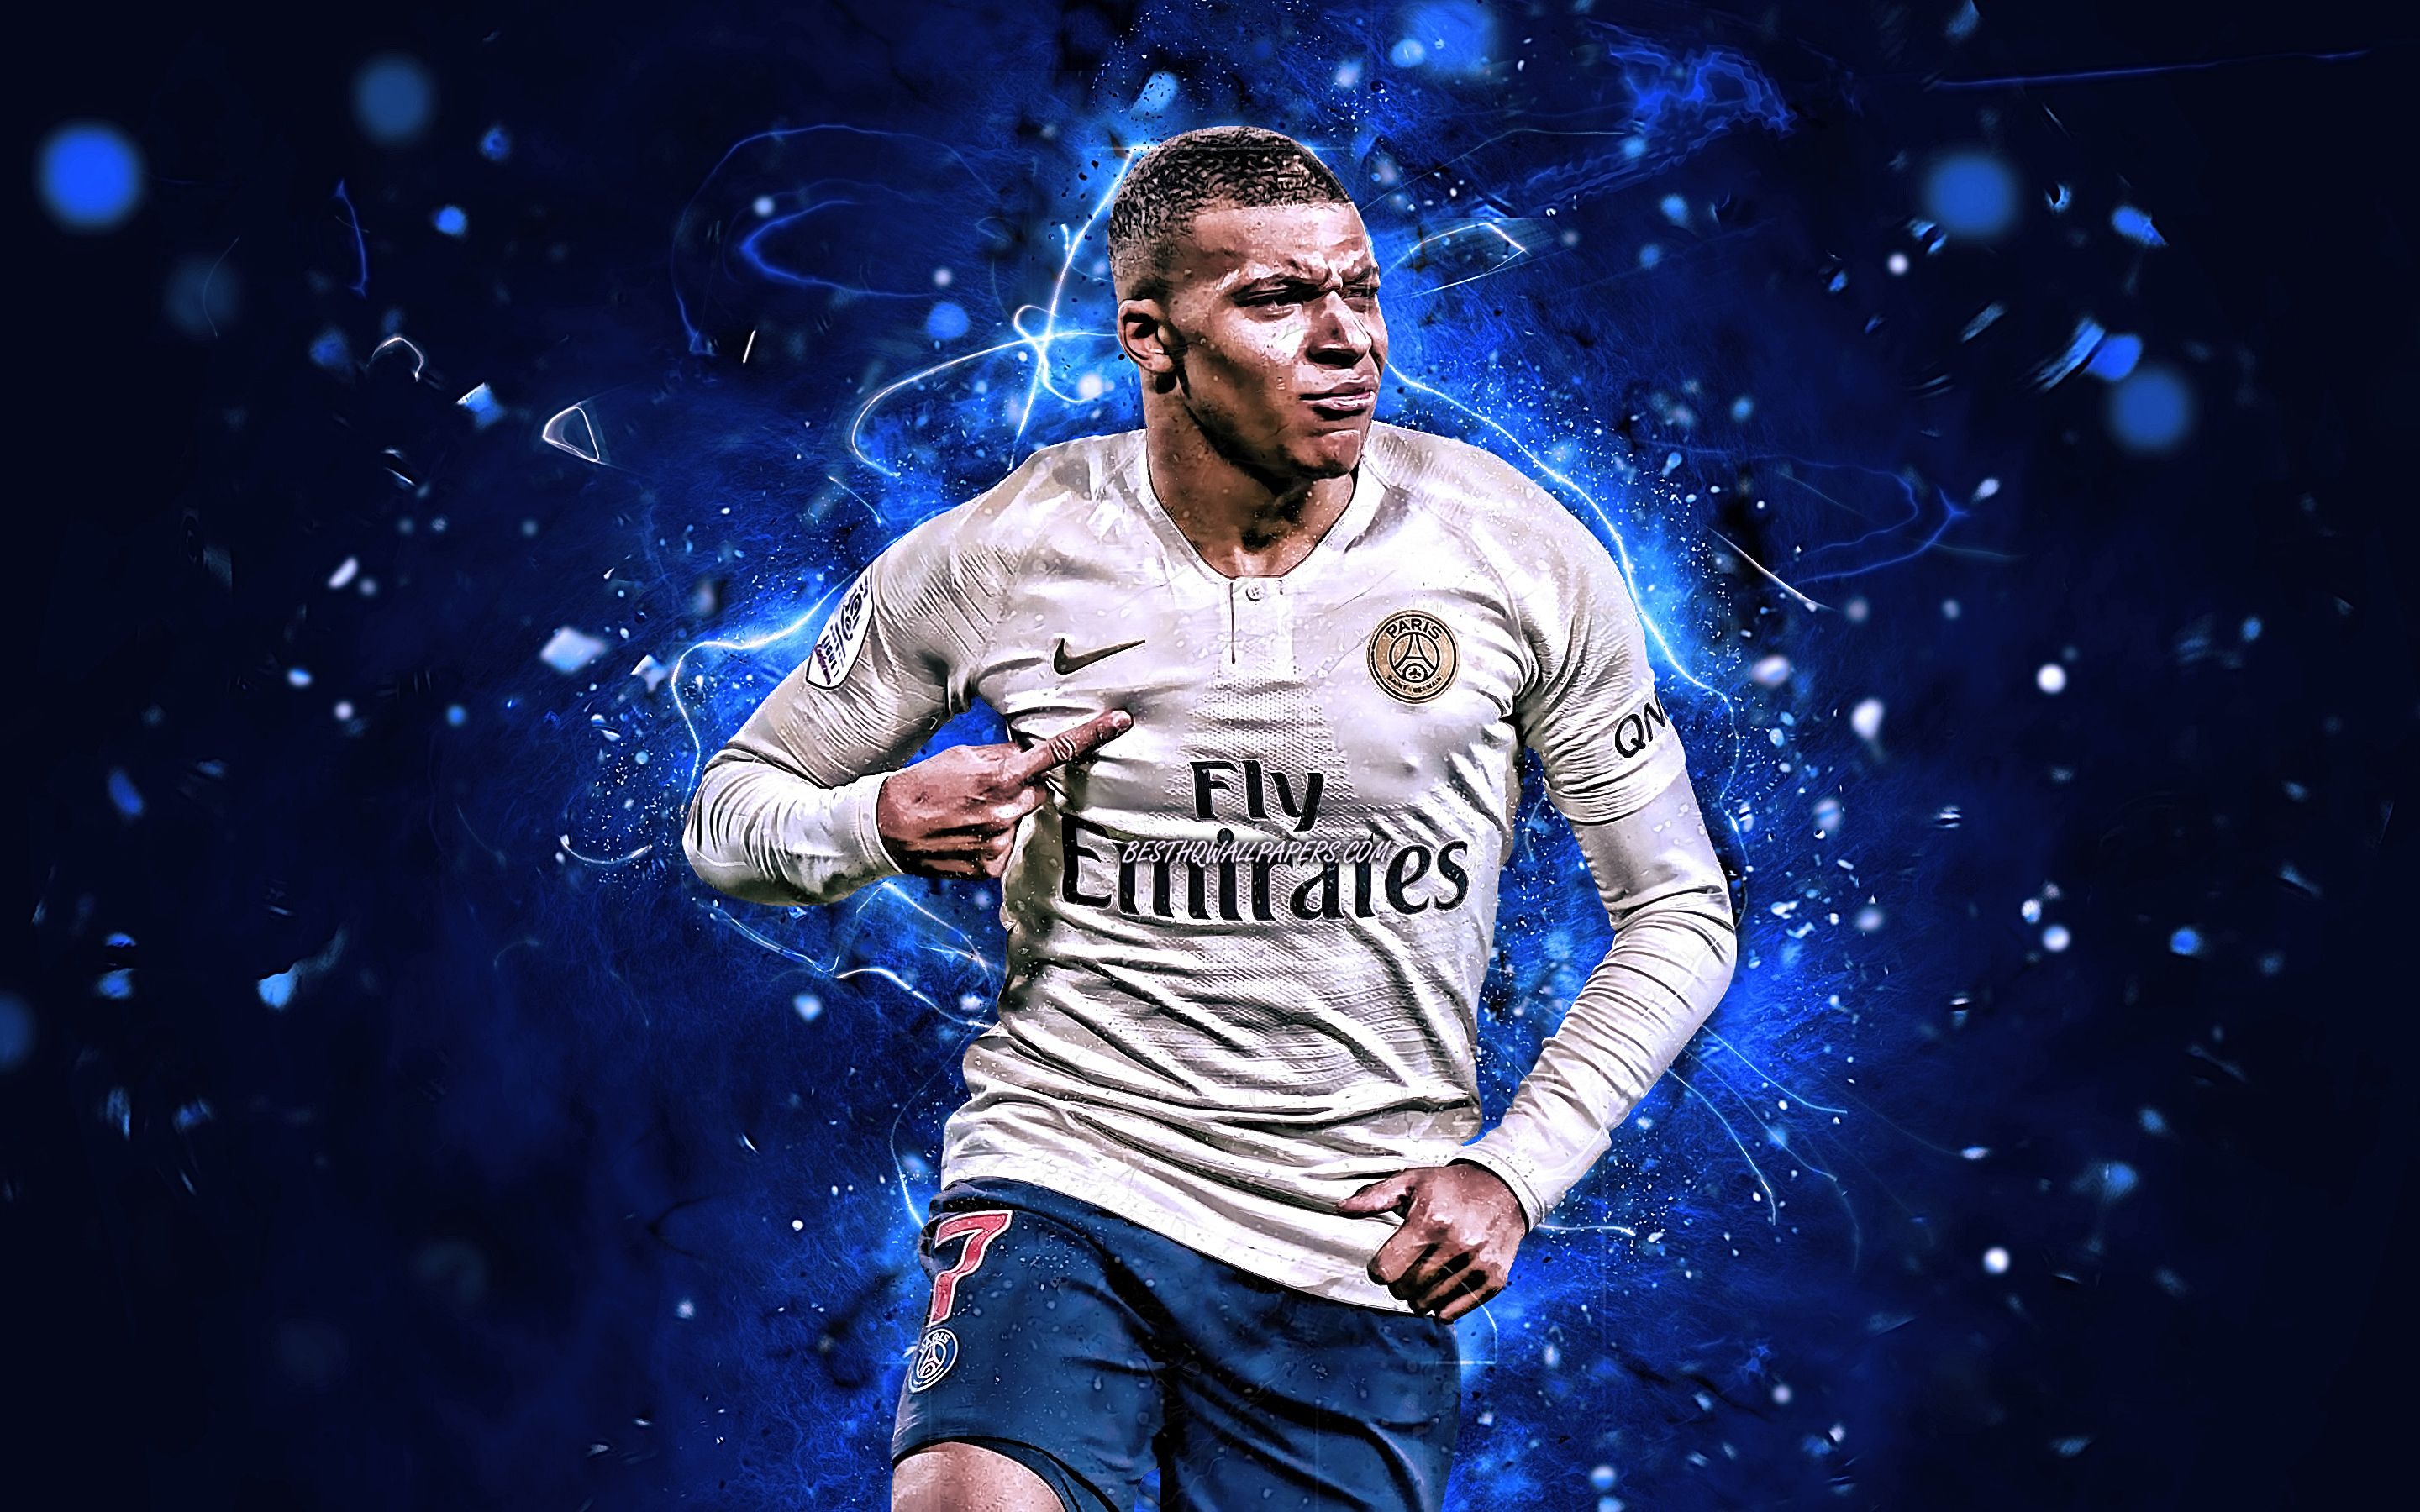 Download Wallpaper Kylian Mbappe, PSG, Football Stars, French Footballers, White Uniform, Ligue Paris Saint Germain, Mbappe, France, Goal, Neon Lights, Soccer For Desktop With Resolution 2880x1800. High Quality HD Picture Wallpaper